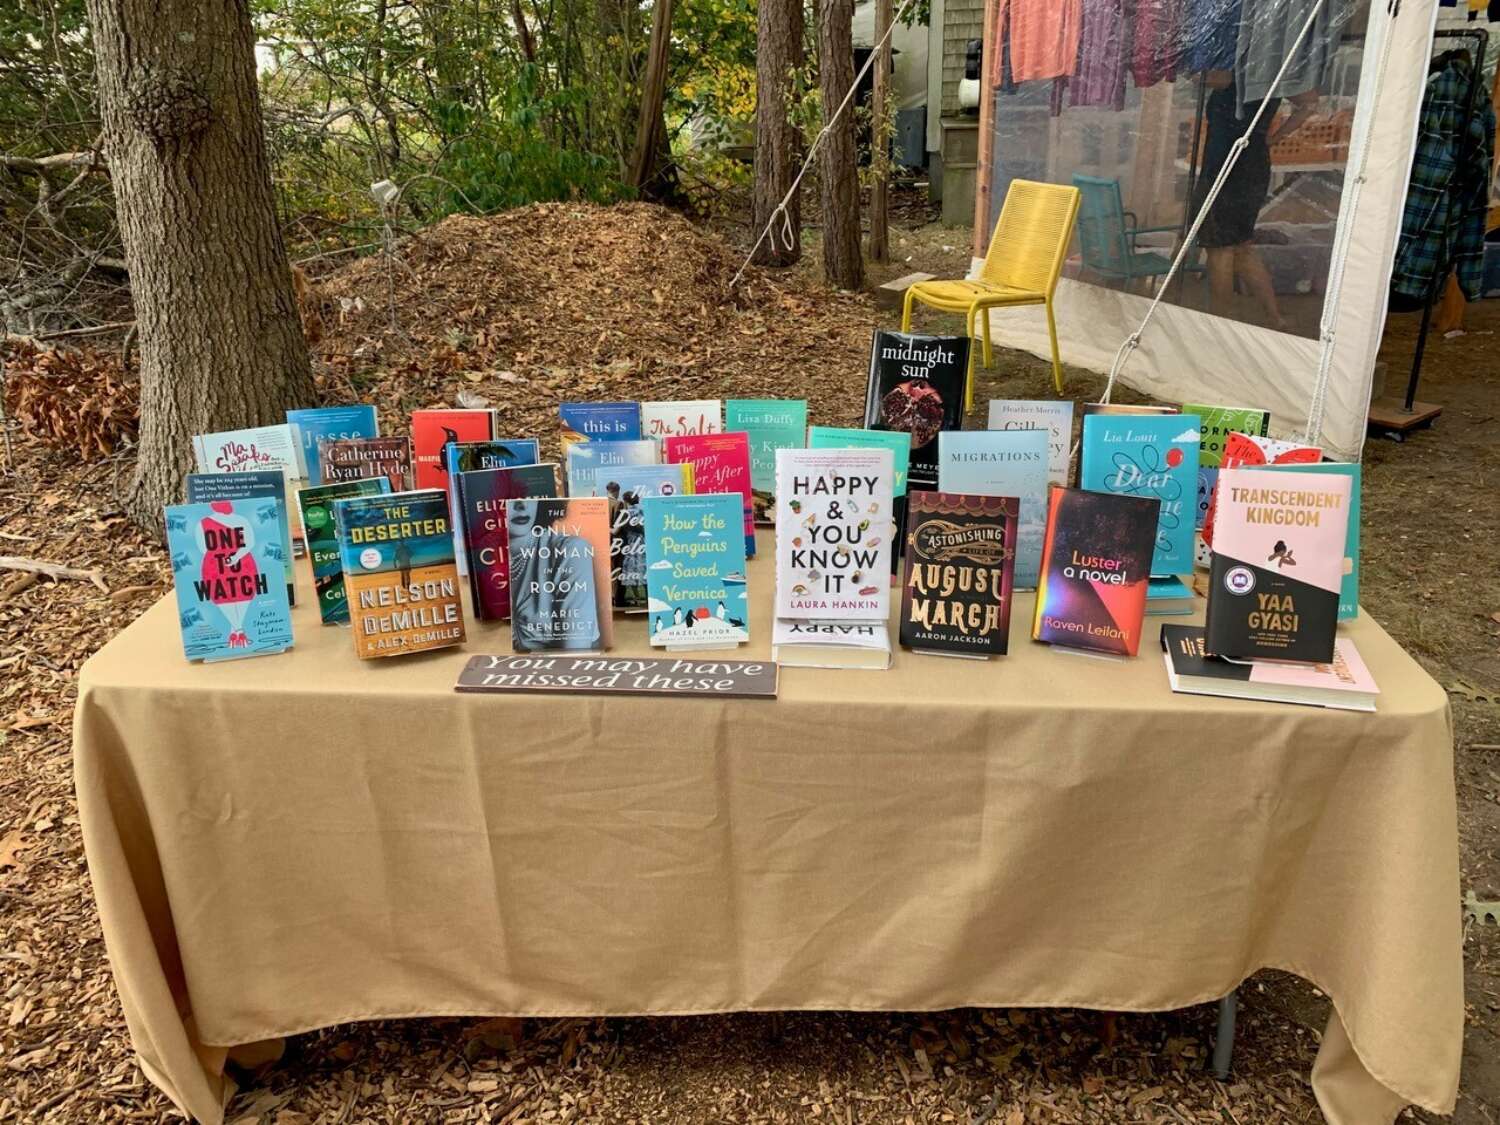 booked. A Pop-Up Bookstore at the Village Green - The Pinehills